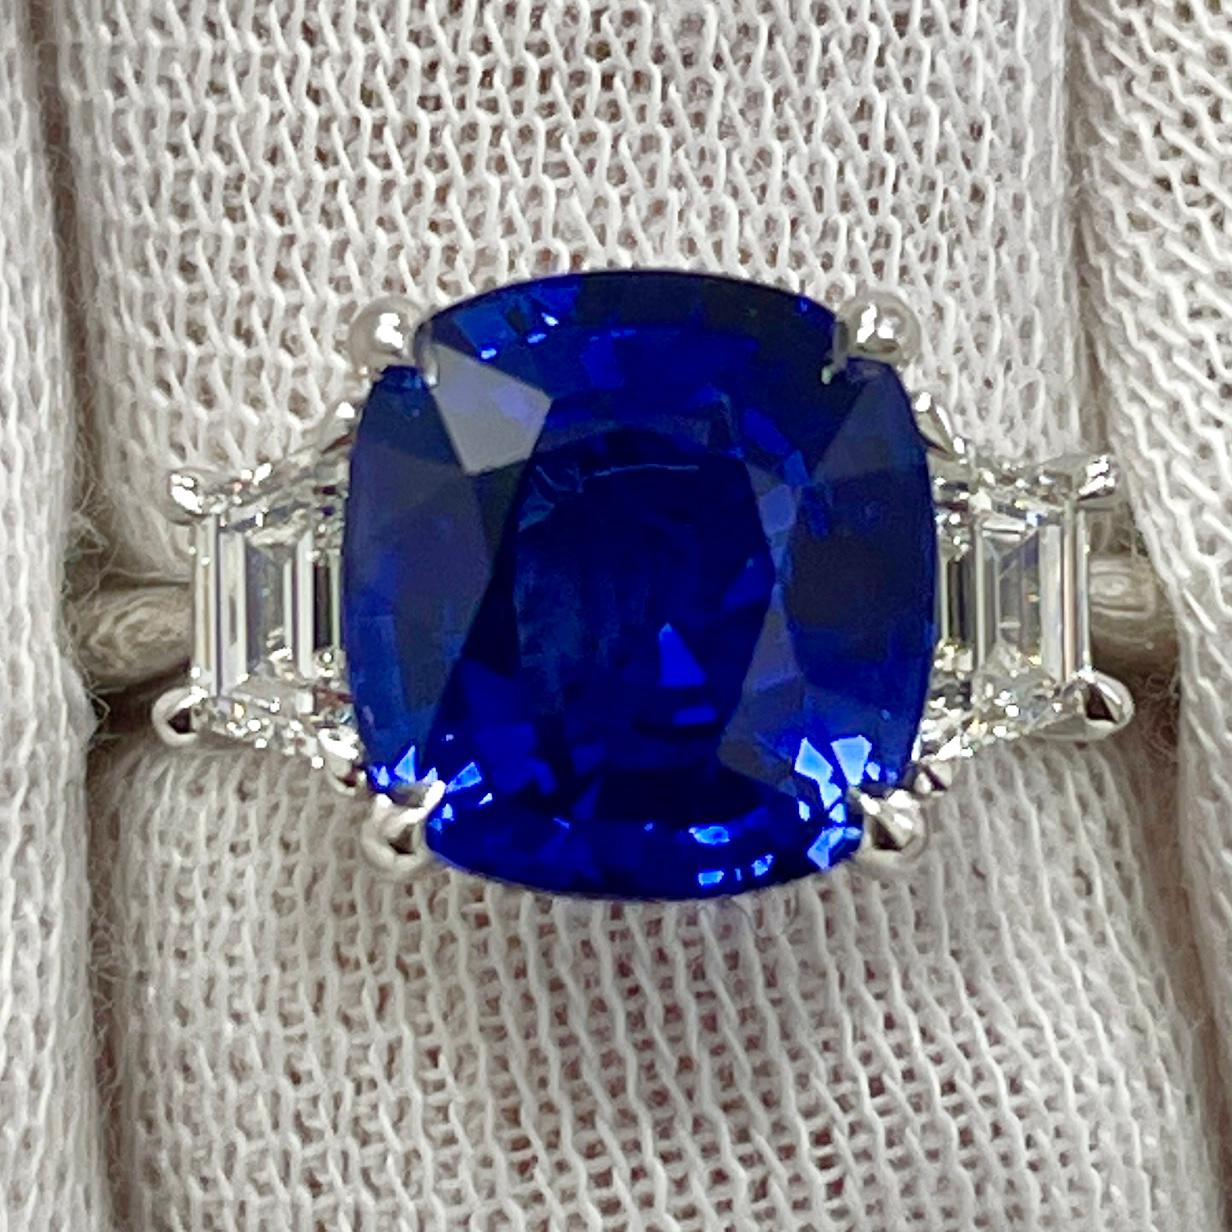 This is a vivid blue cushion sapphire mounted in an elegant 18K white gold ring with 0.44Ct of brilliant white diamonds. Suitable for any occasion!